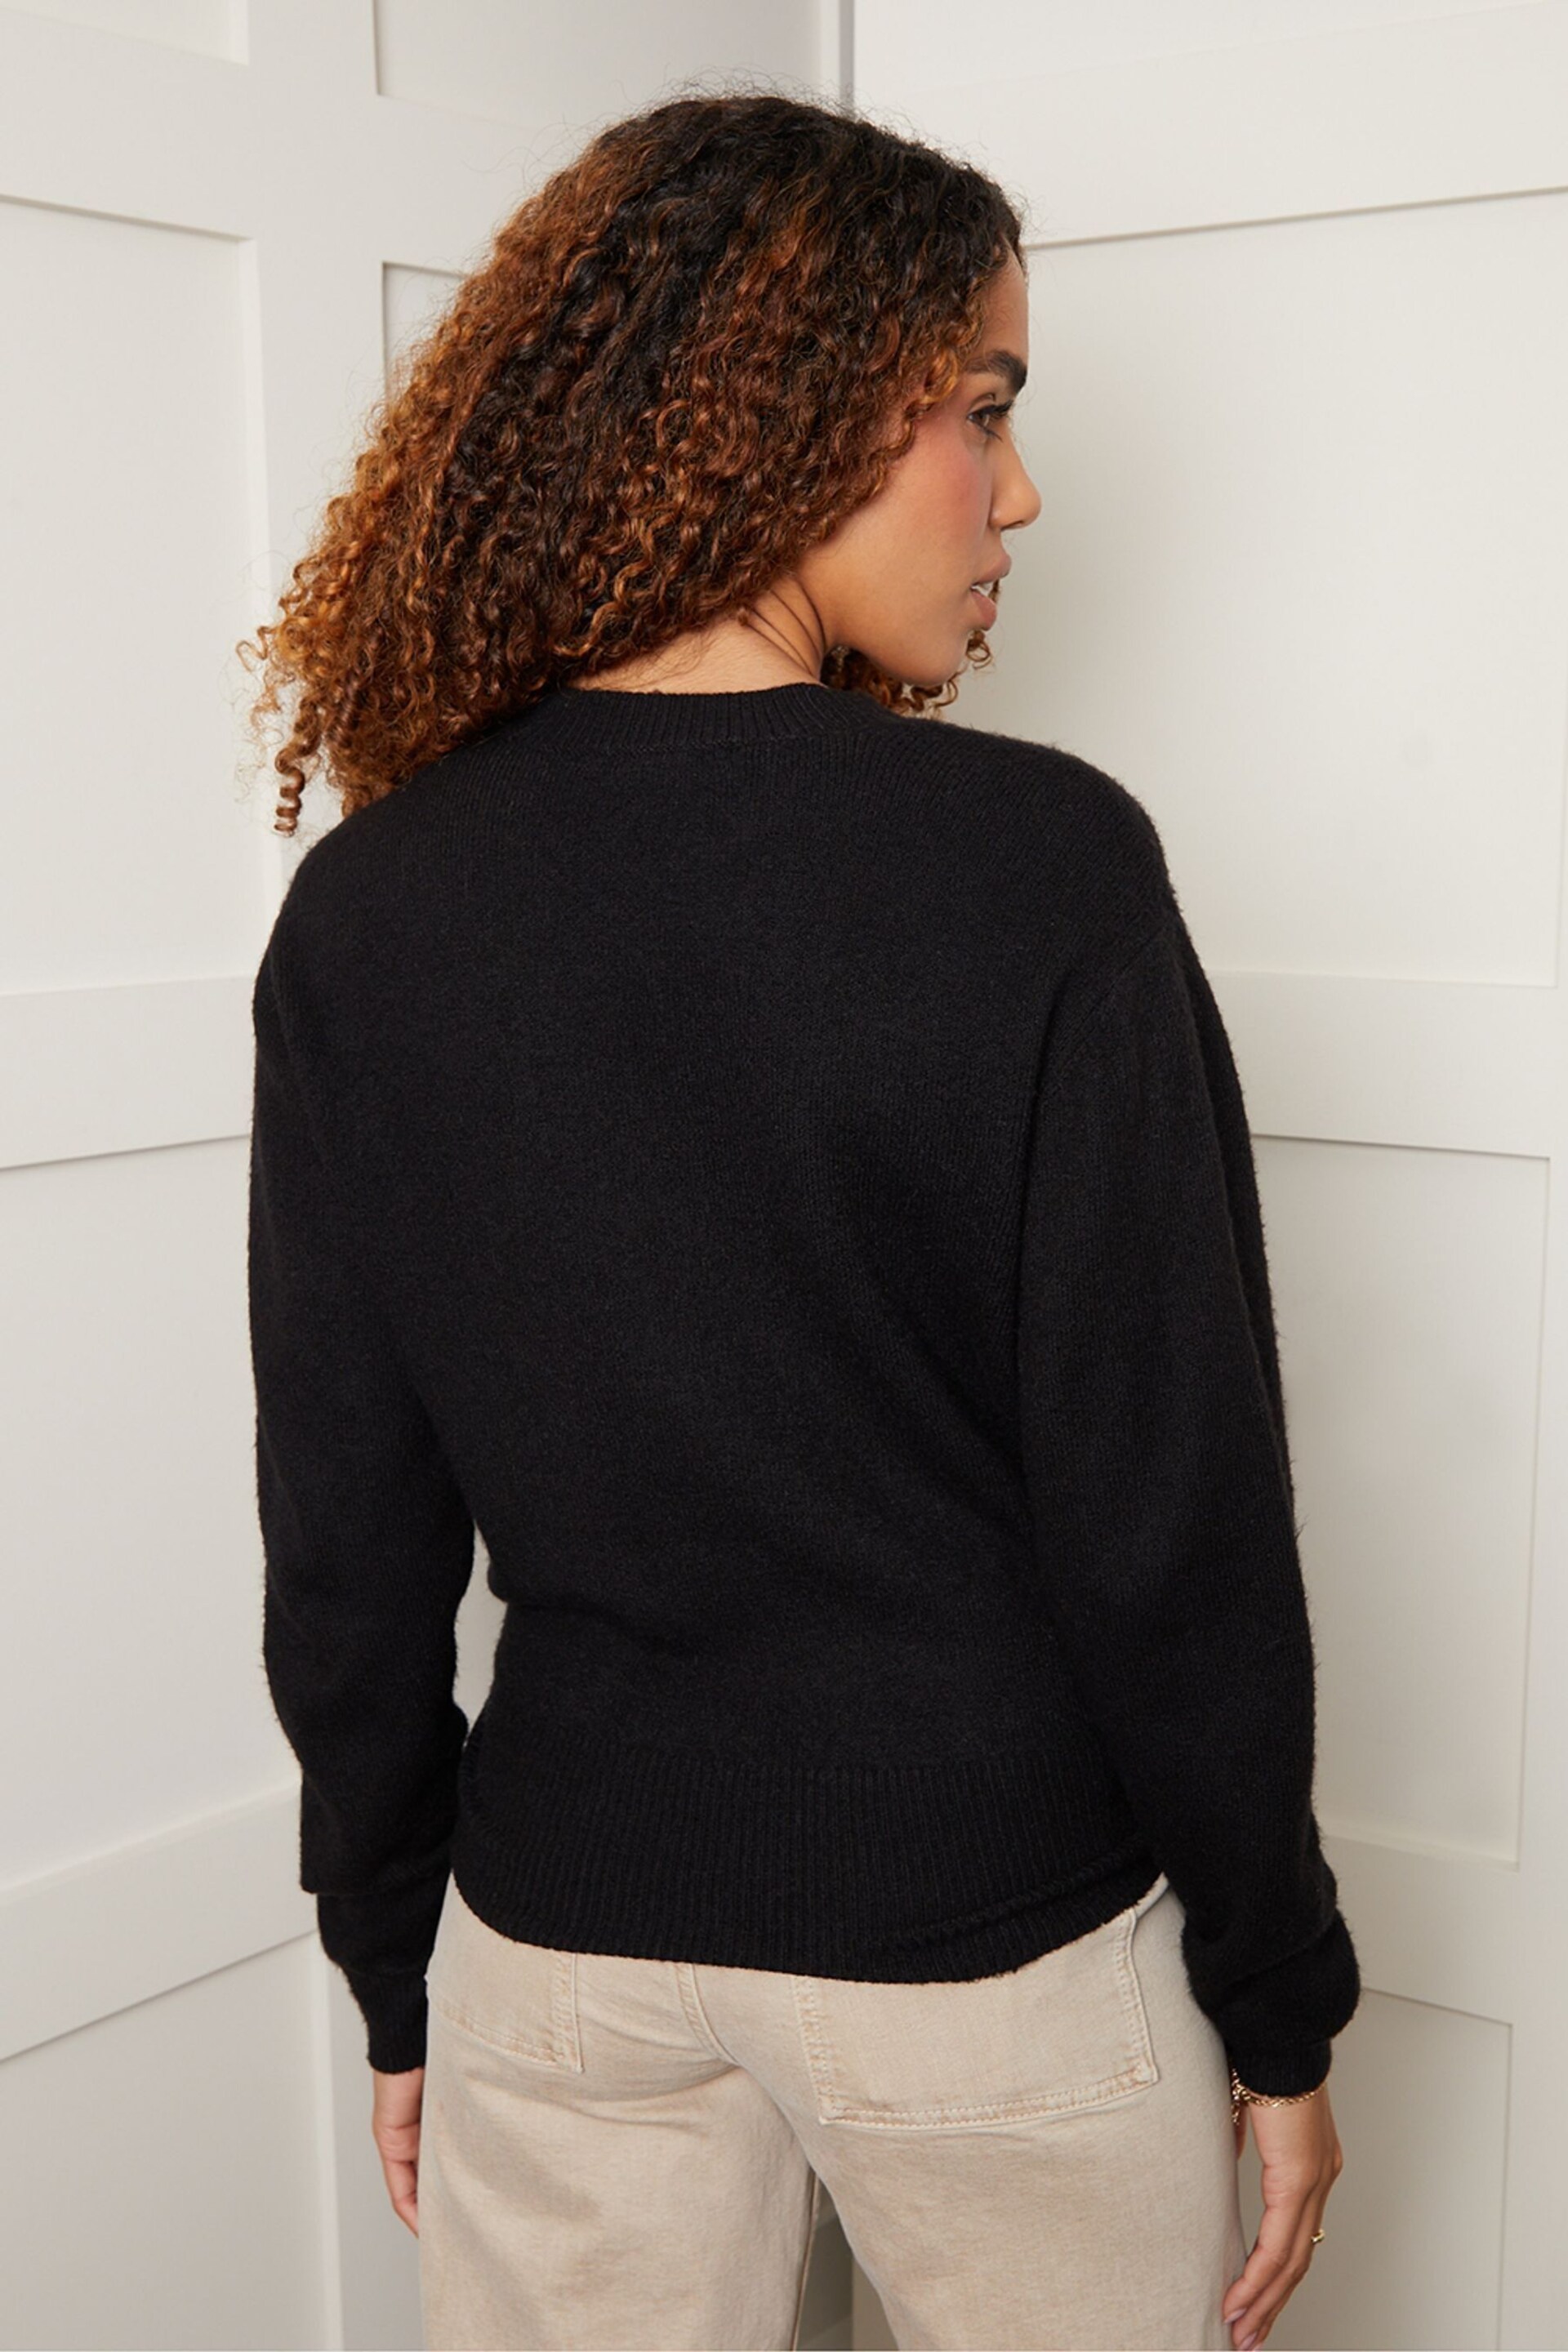 Threadbare Black Wrap Front Knitted Jumper - Image 2 of 4